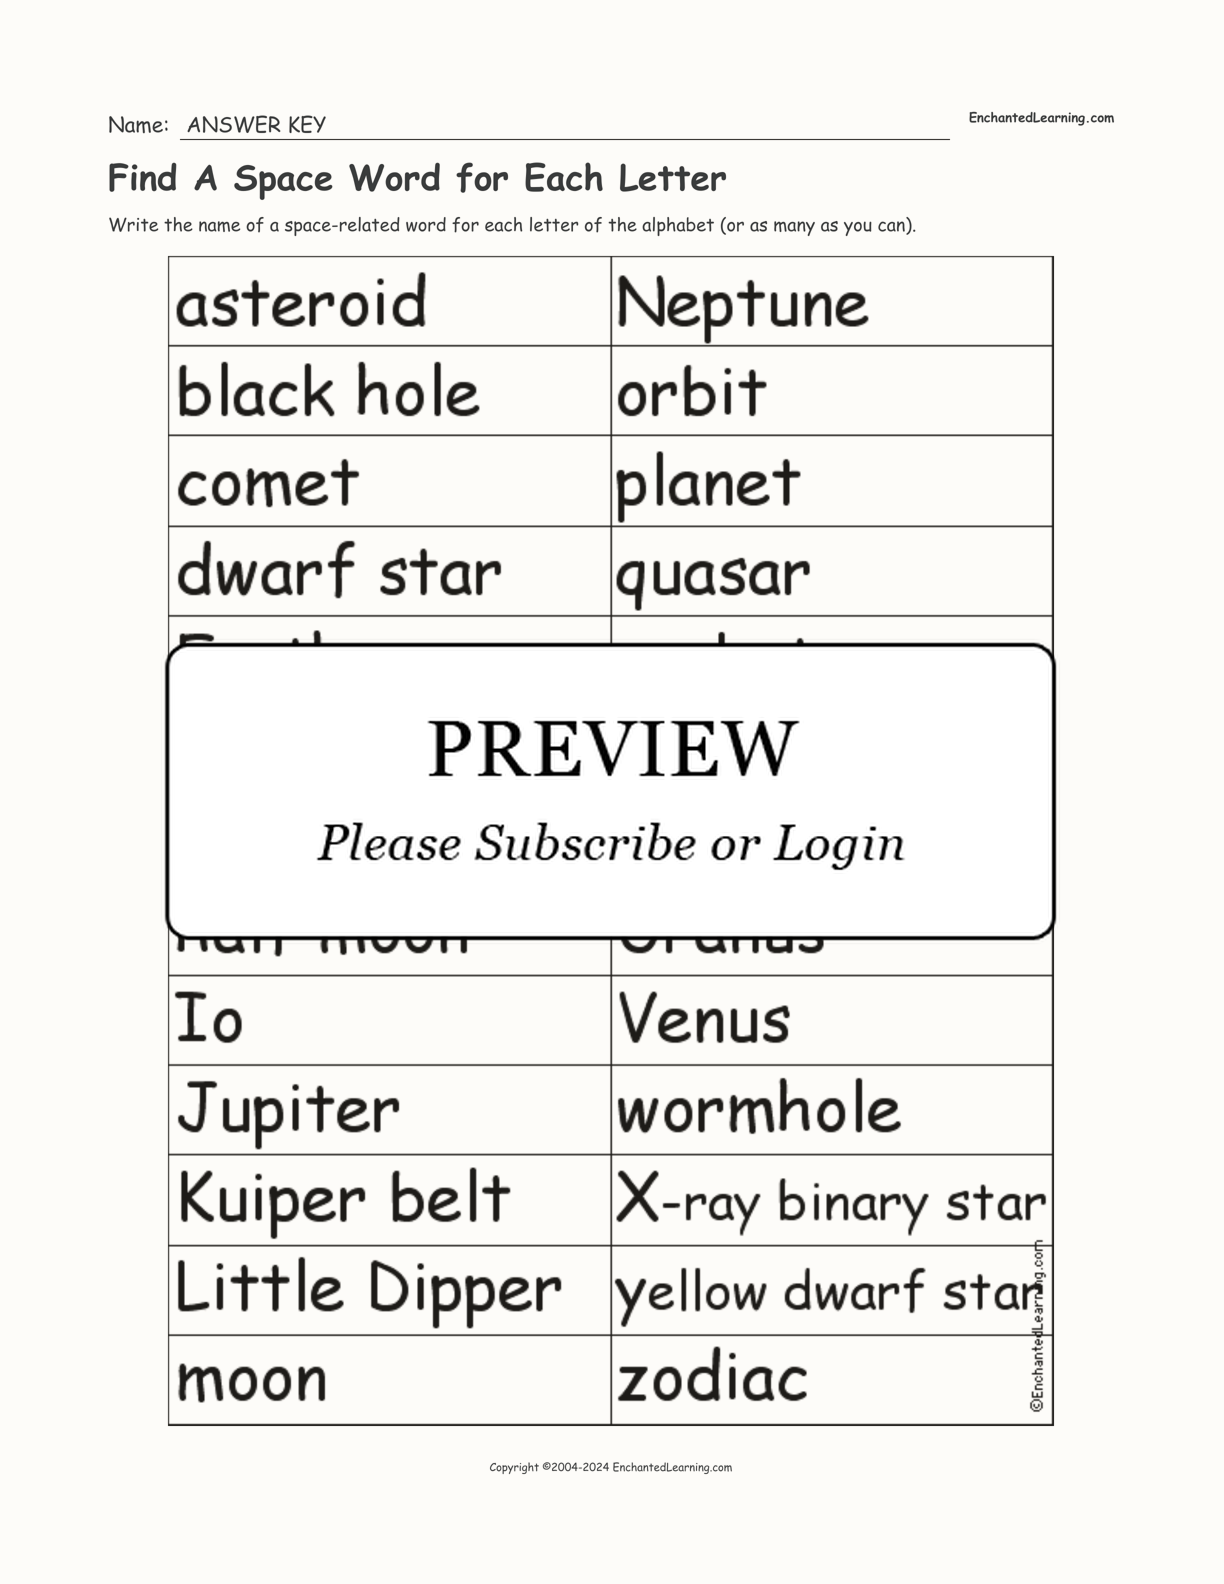 Find A Space Word for Each Letter interactive worksheet page 2